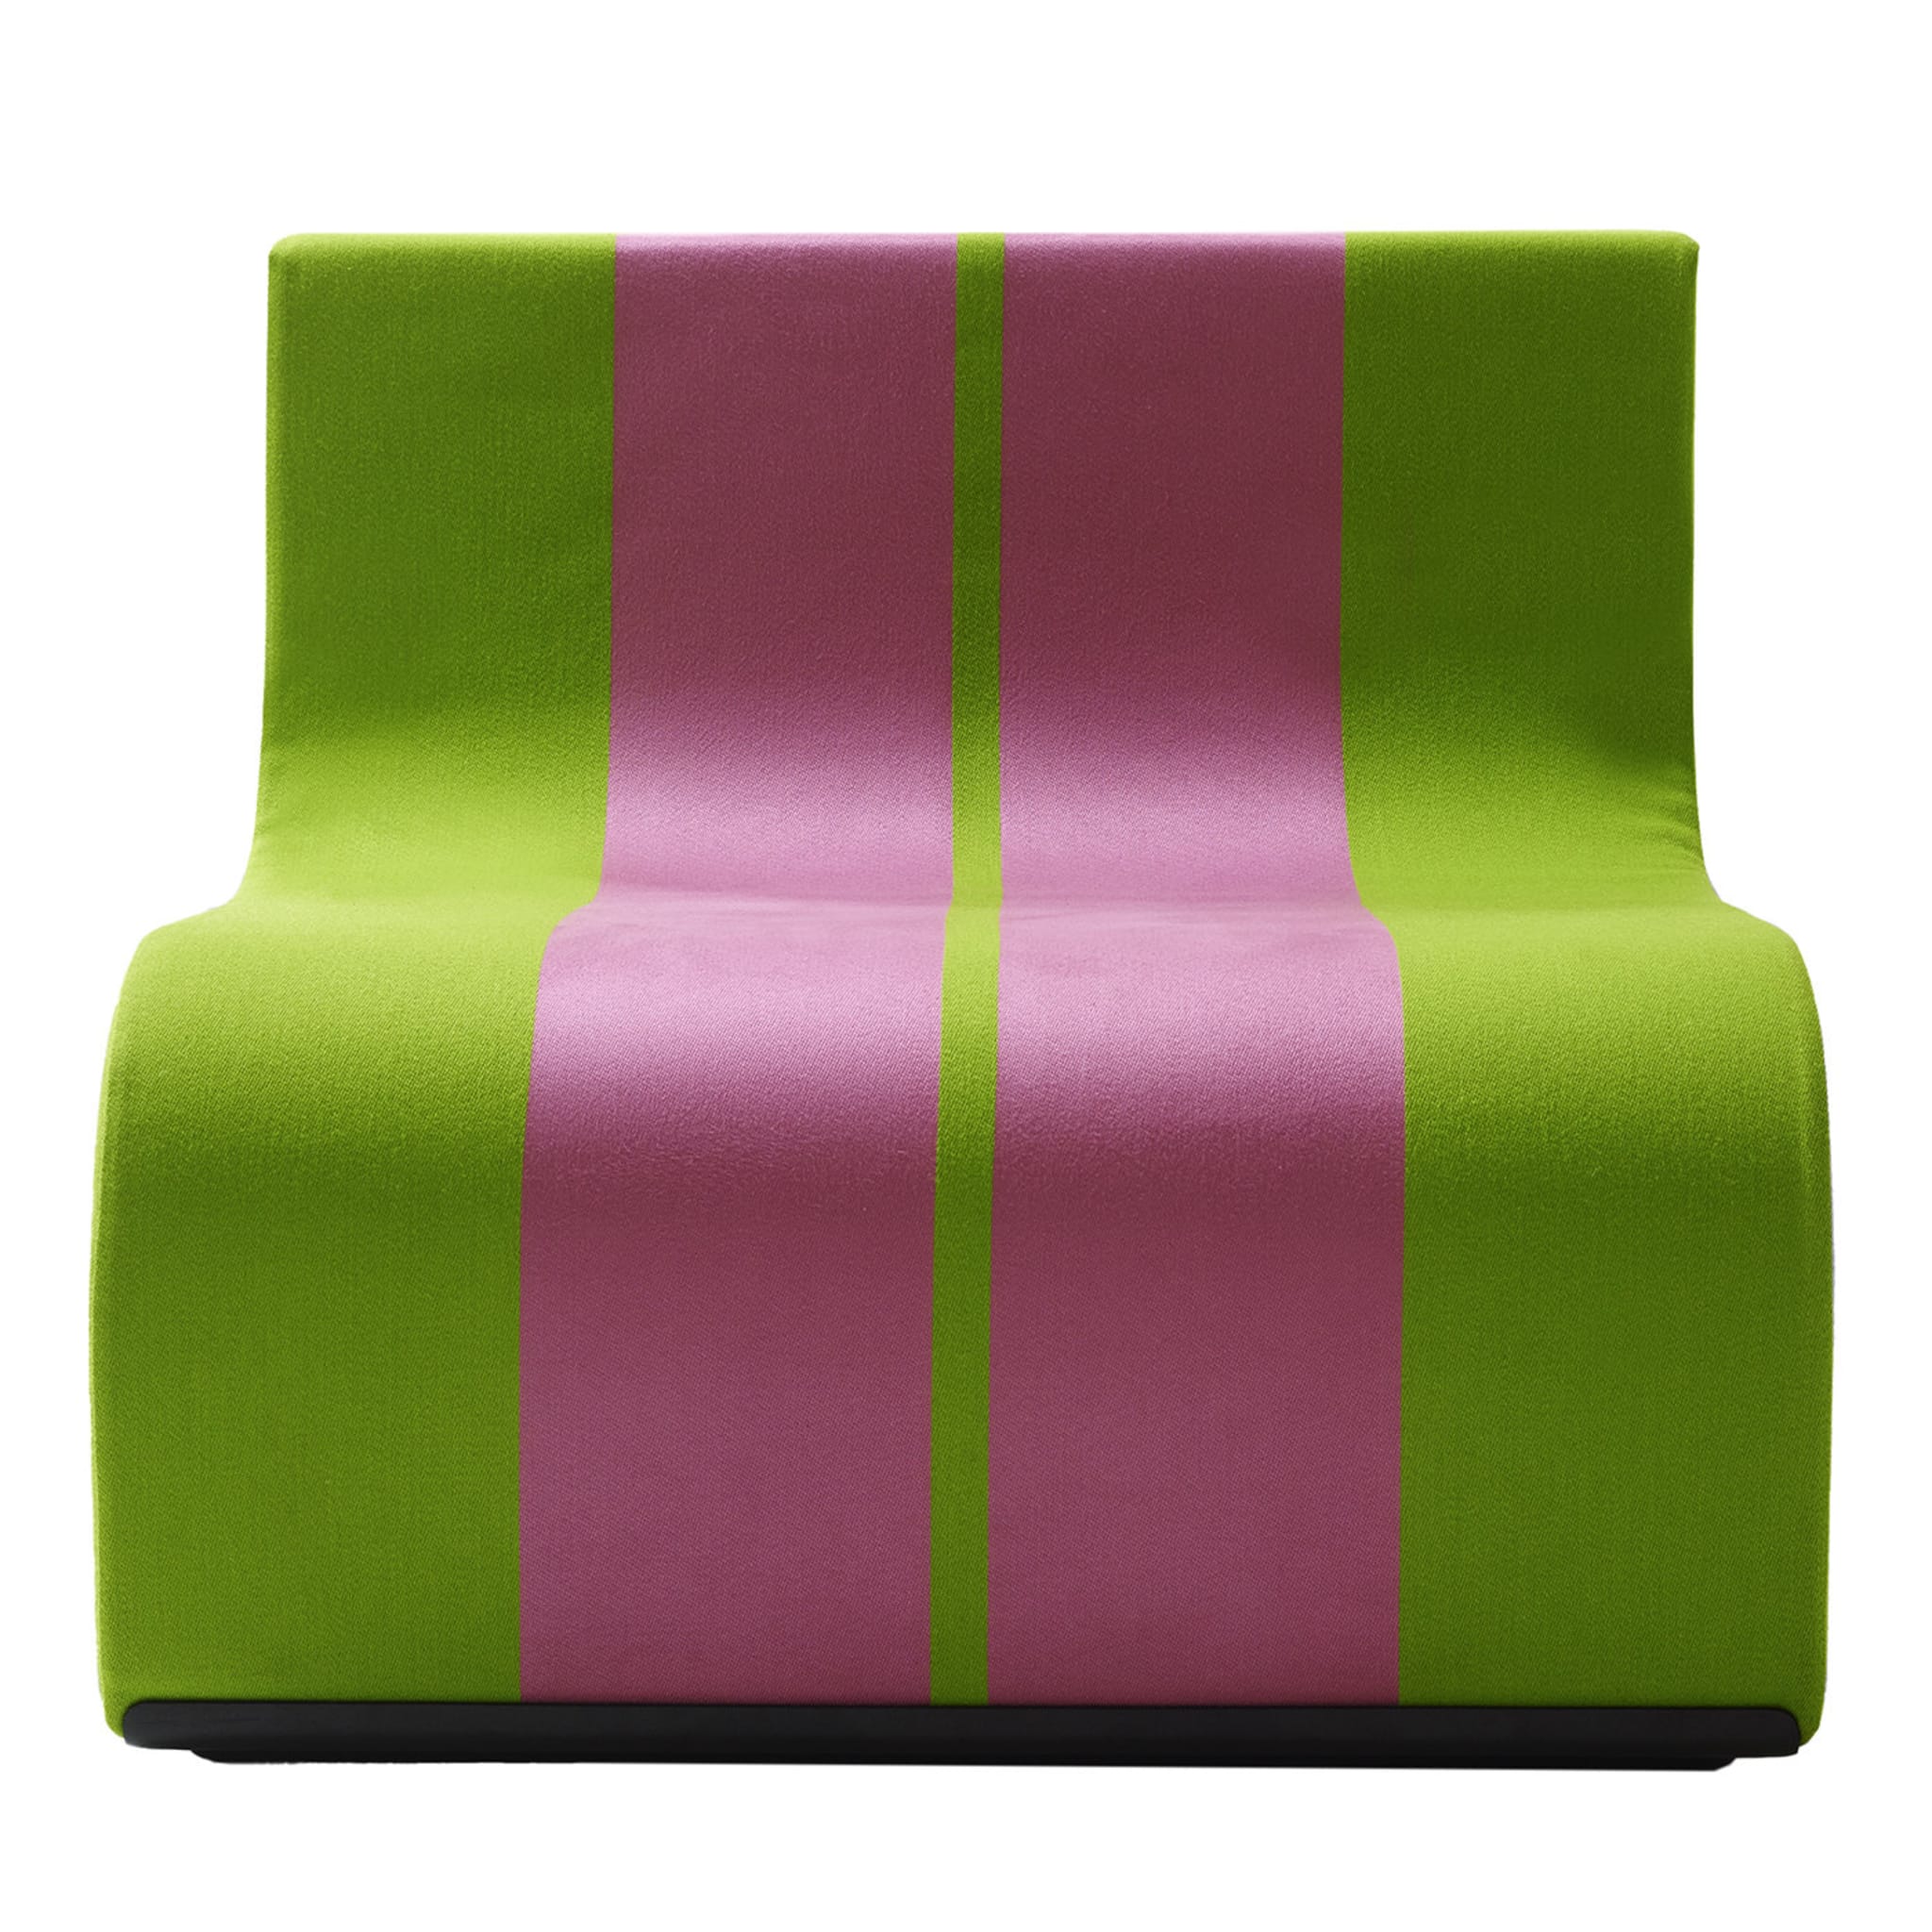 Sofo Green and Pink Armchair - Main view